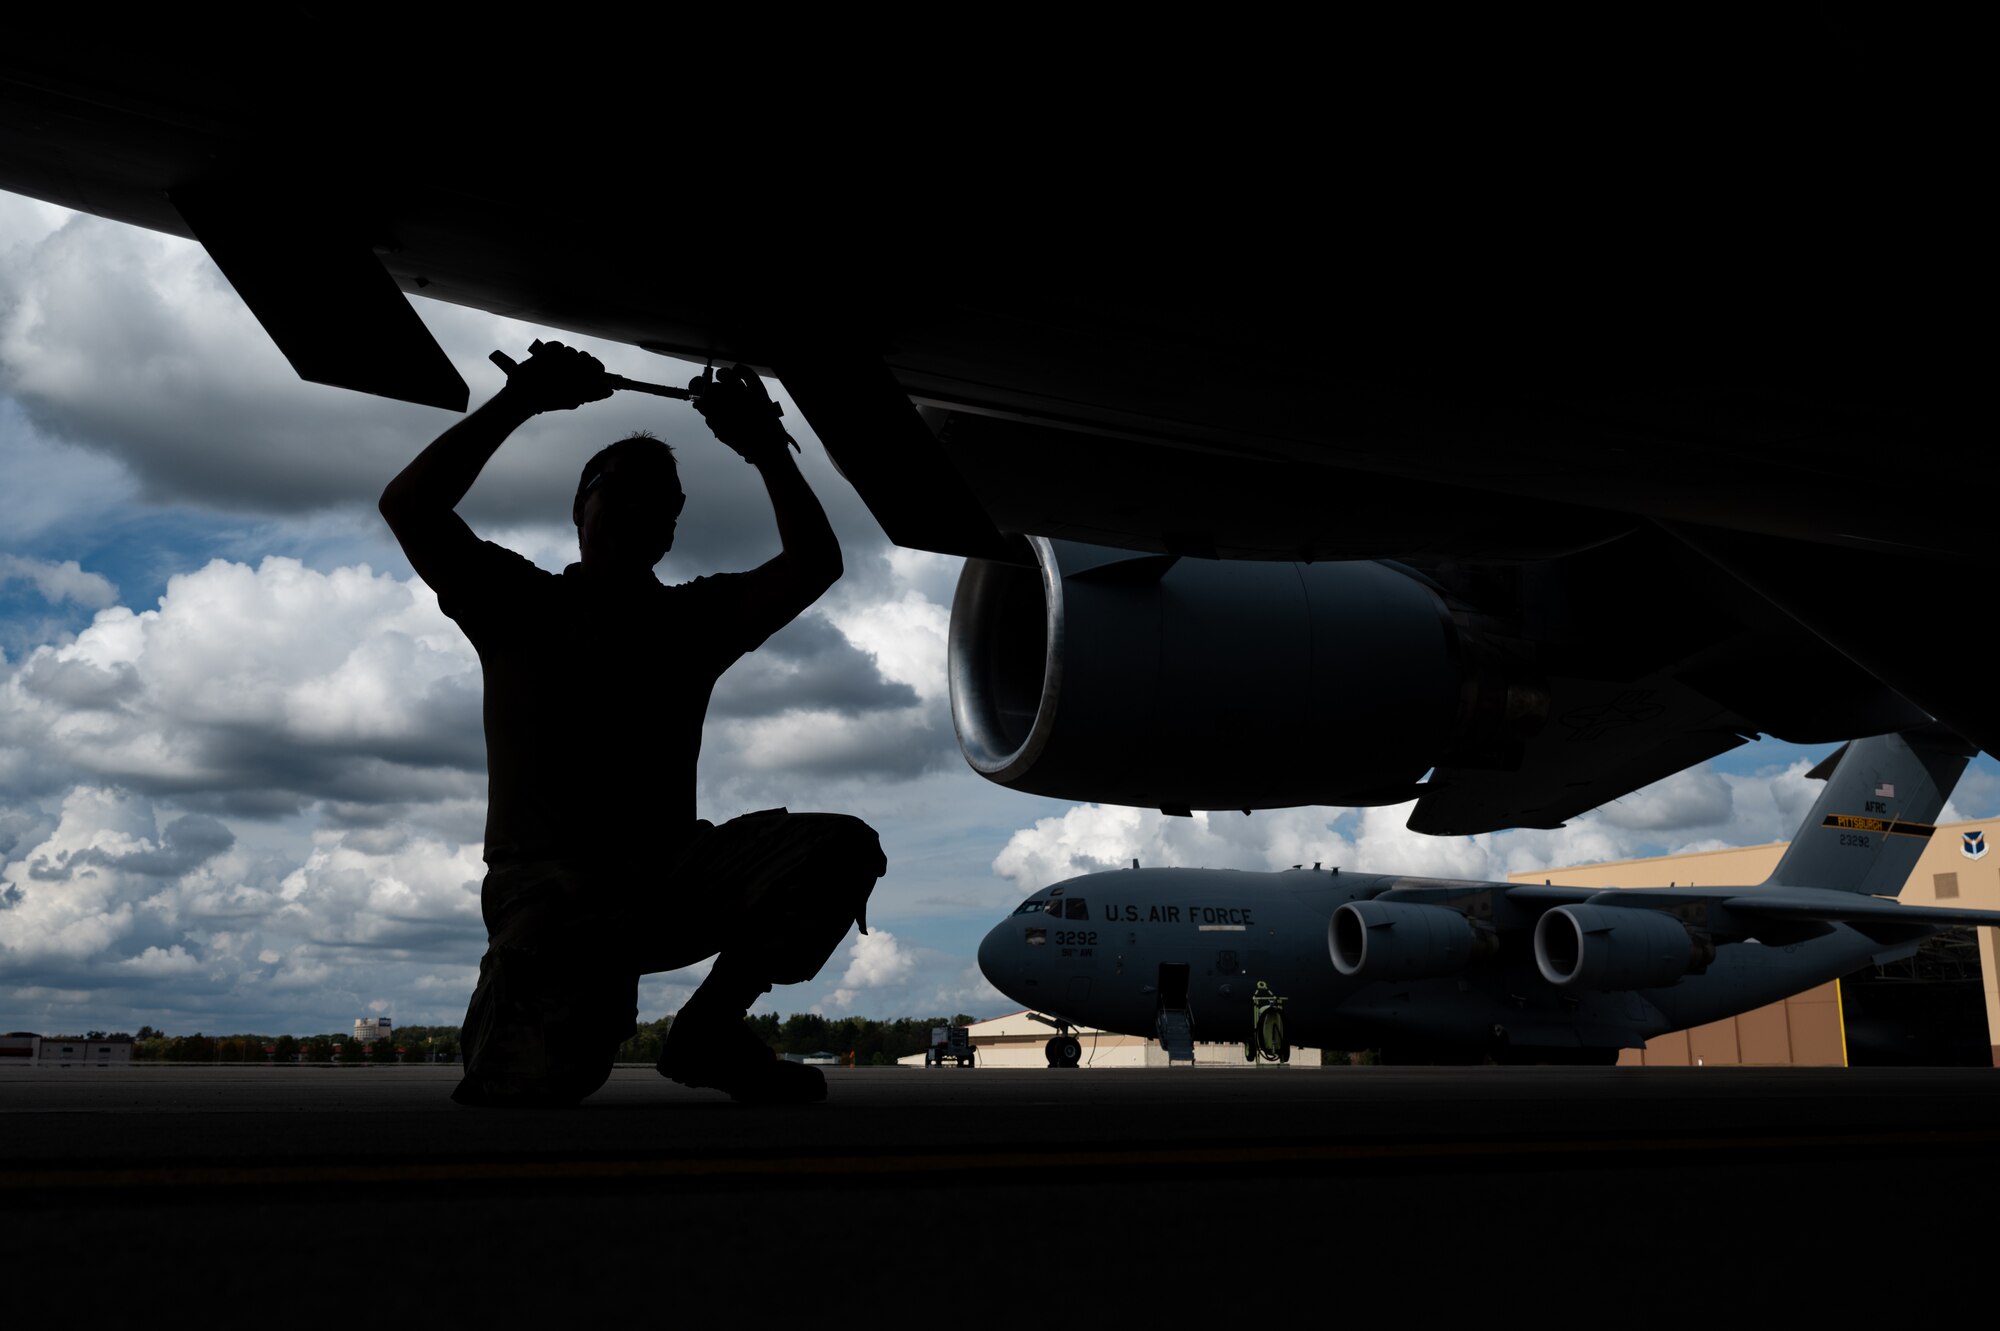 A kneeling man is silhouetted against a cloudy sky while holding a wrench and working on a panel under a large aircraft